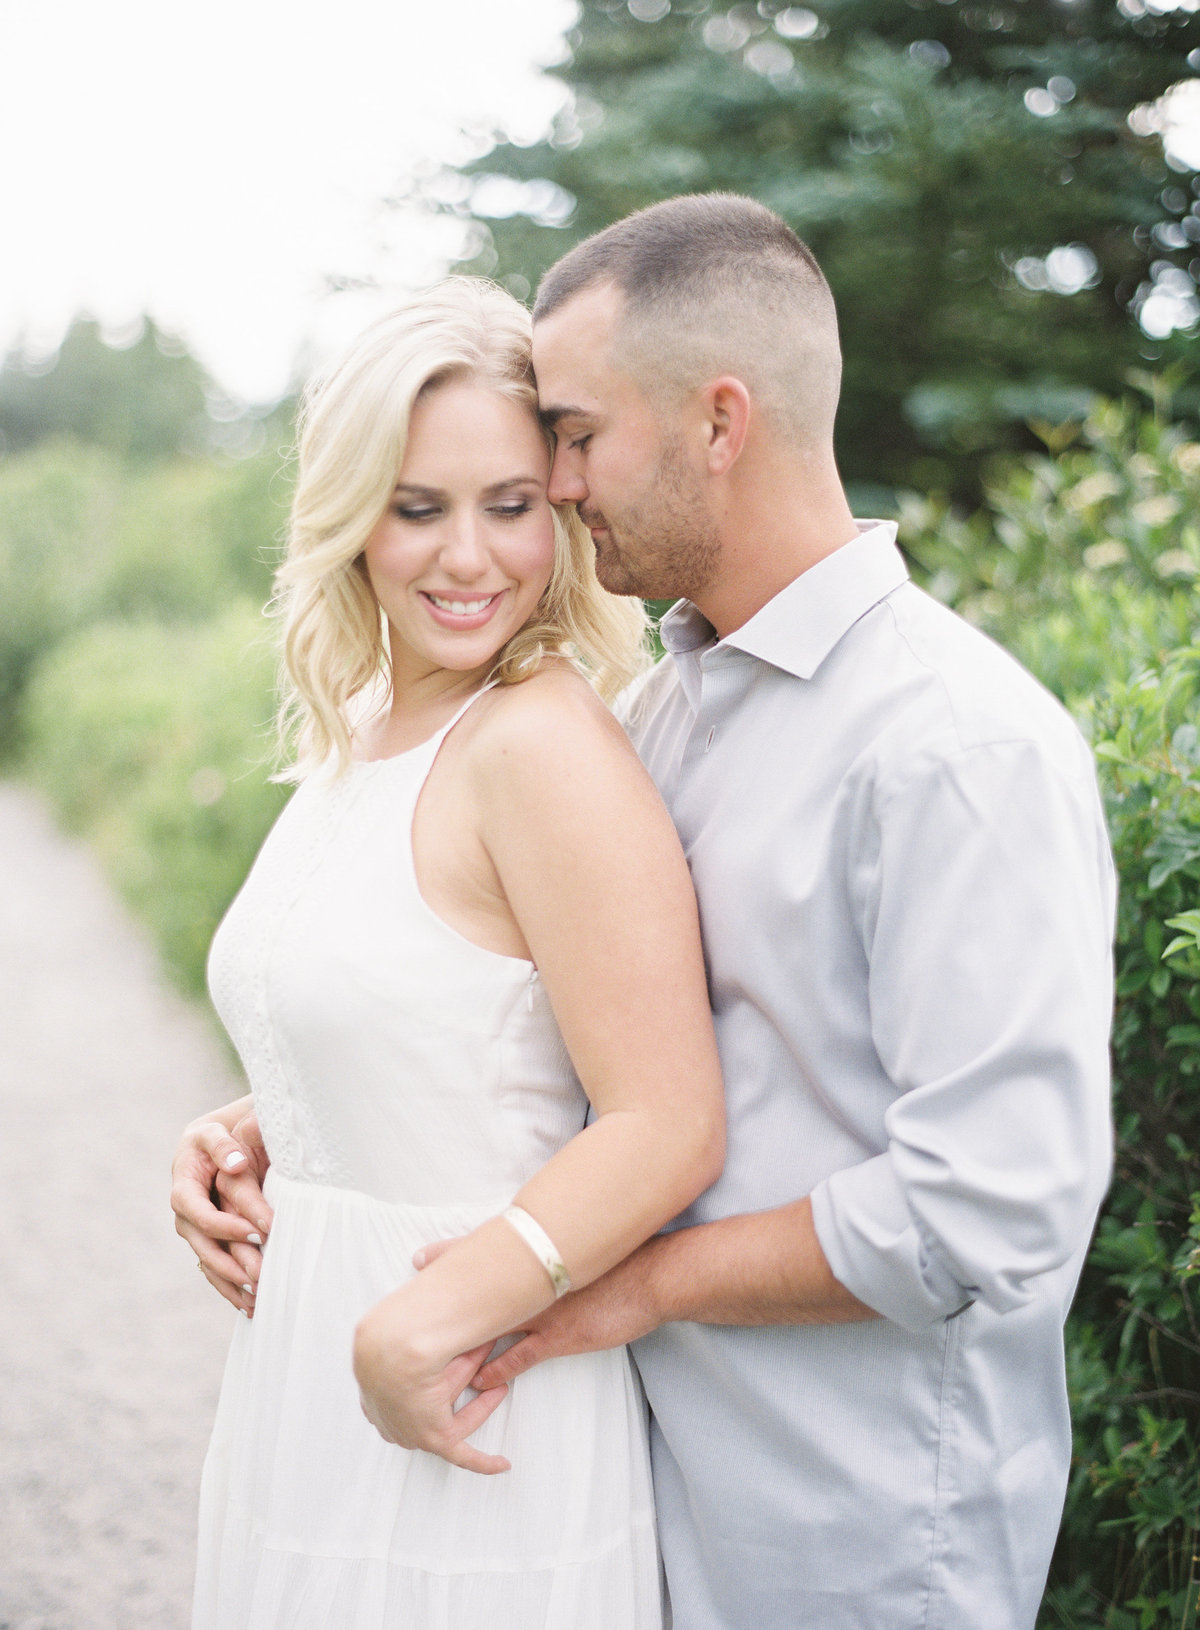 Jacqueline Anne Photography  - Hailey and Shea - Crystal Crescent Beach Engagement-13